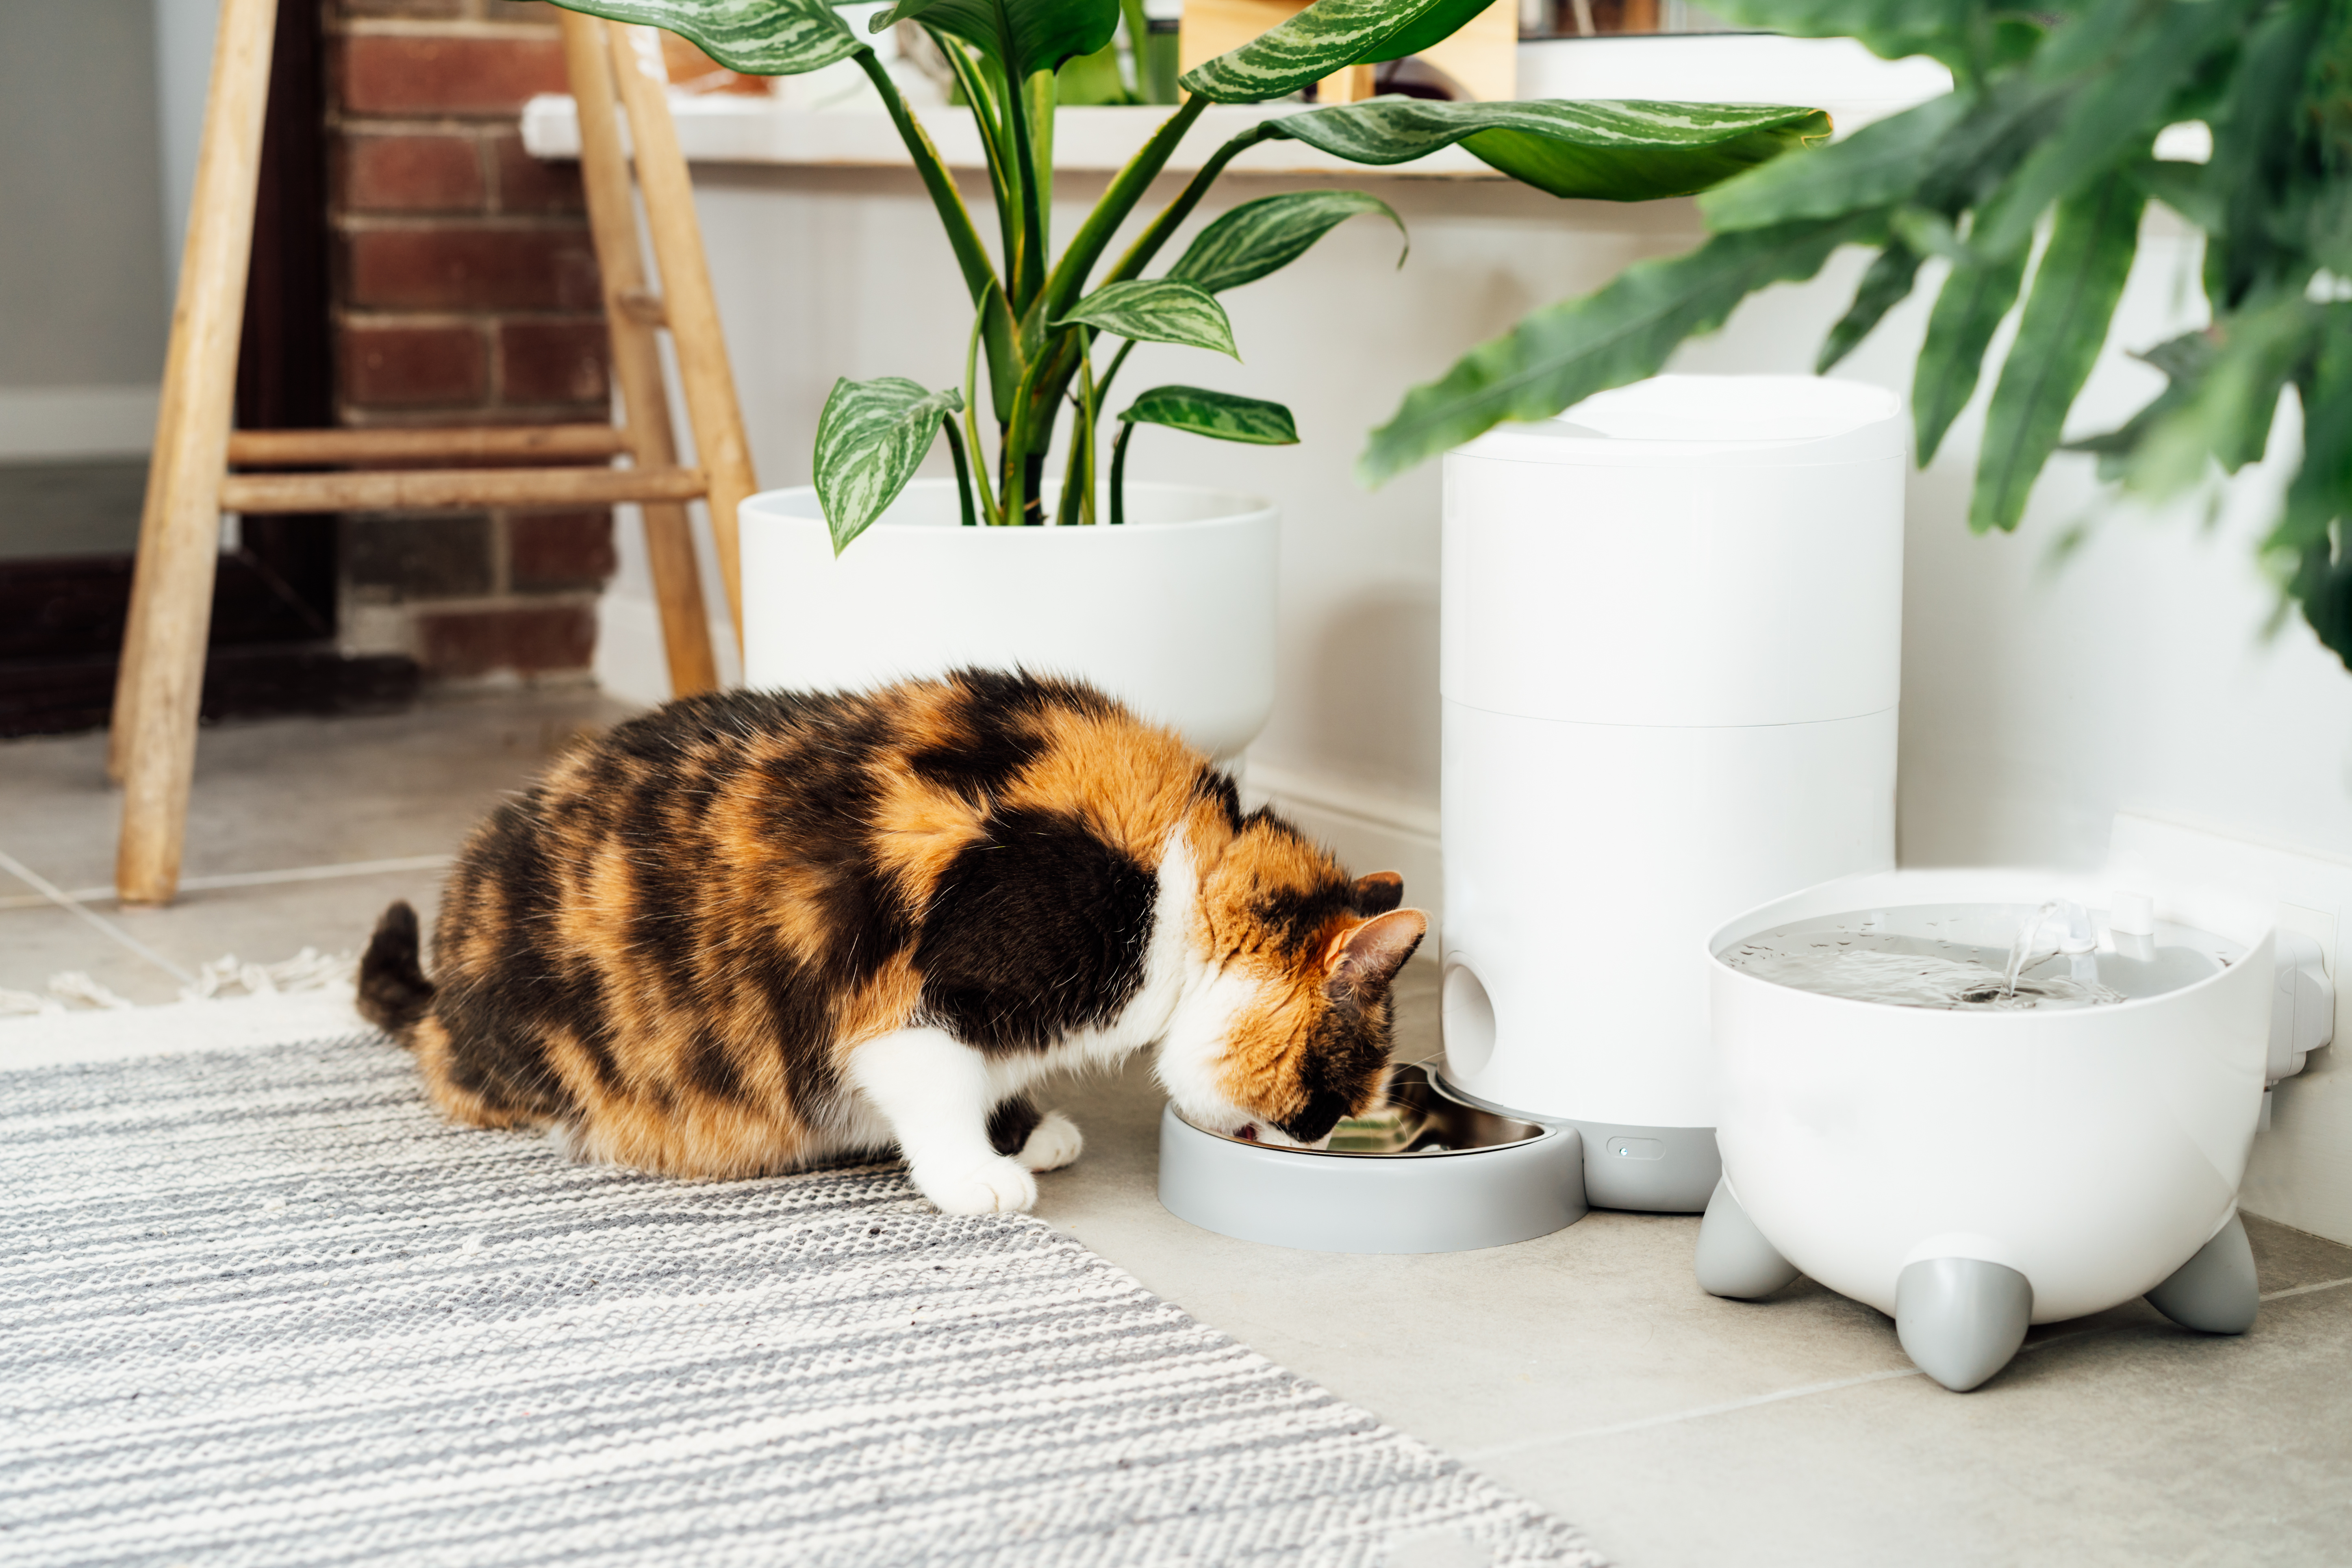 Adorable colorful cat eating from automatic smart feeder in cozy home interior. Home life with a pet. Healthy pet food diet concept. Selective focus, copy space.